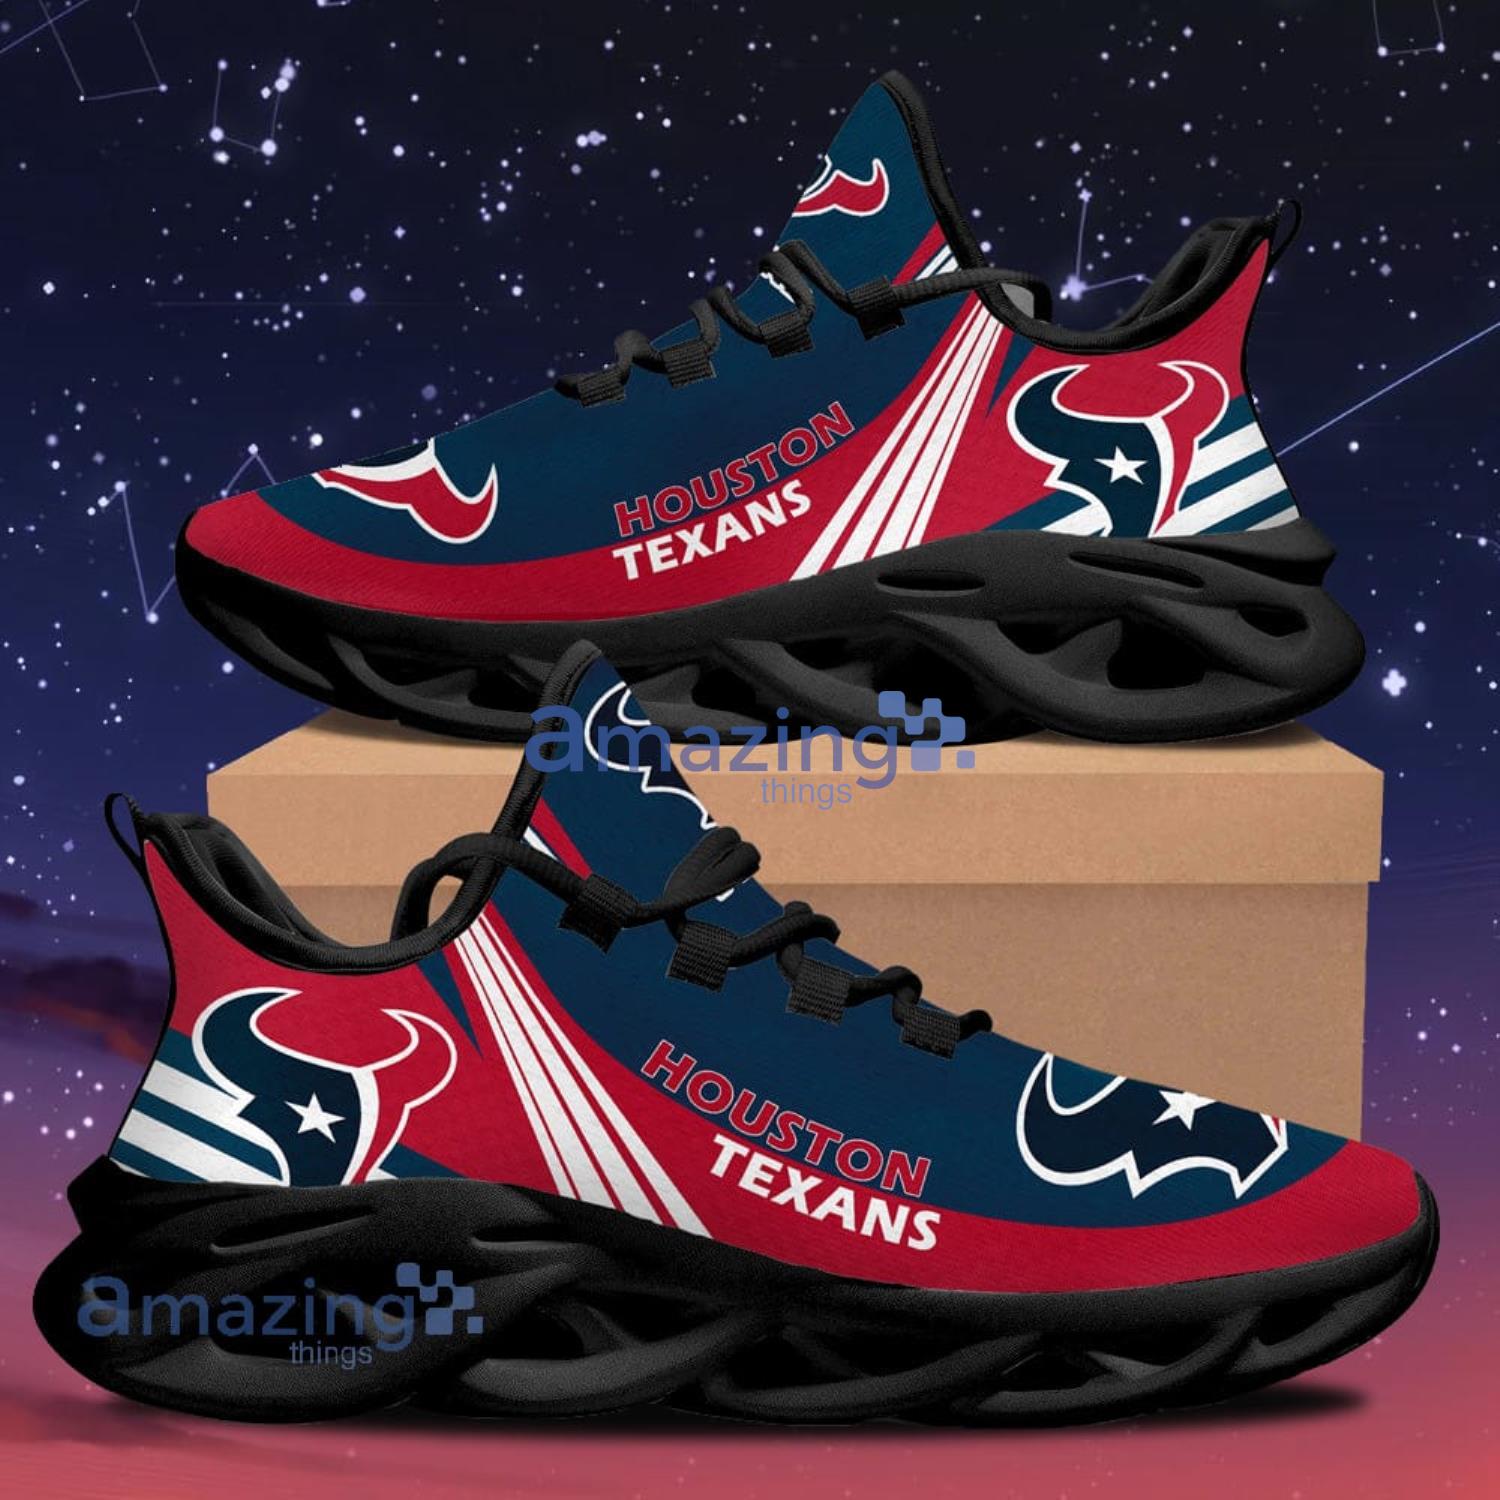 Houston Texans New Trend Max Soul Shoes Running Sneakers Product Photo 1